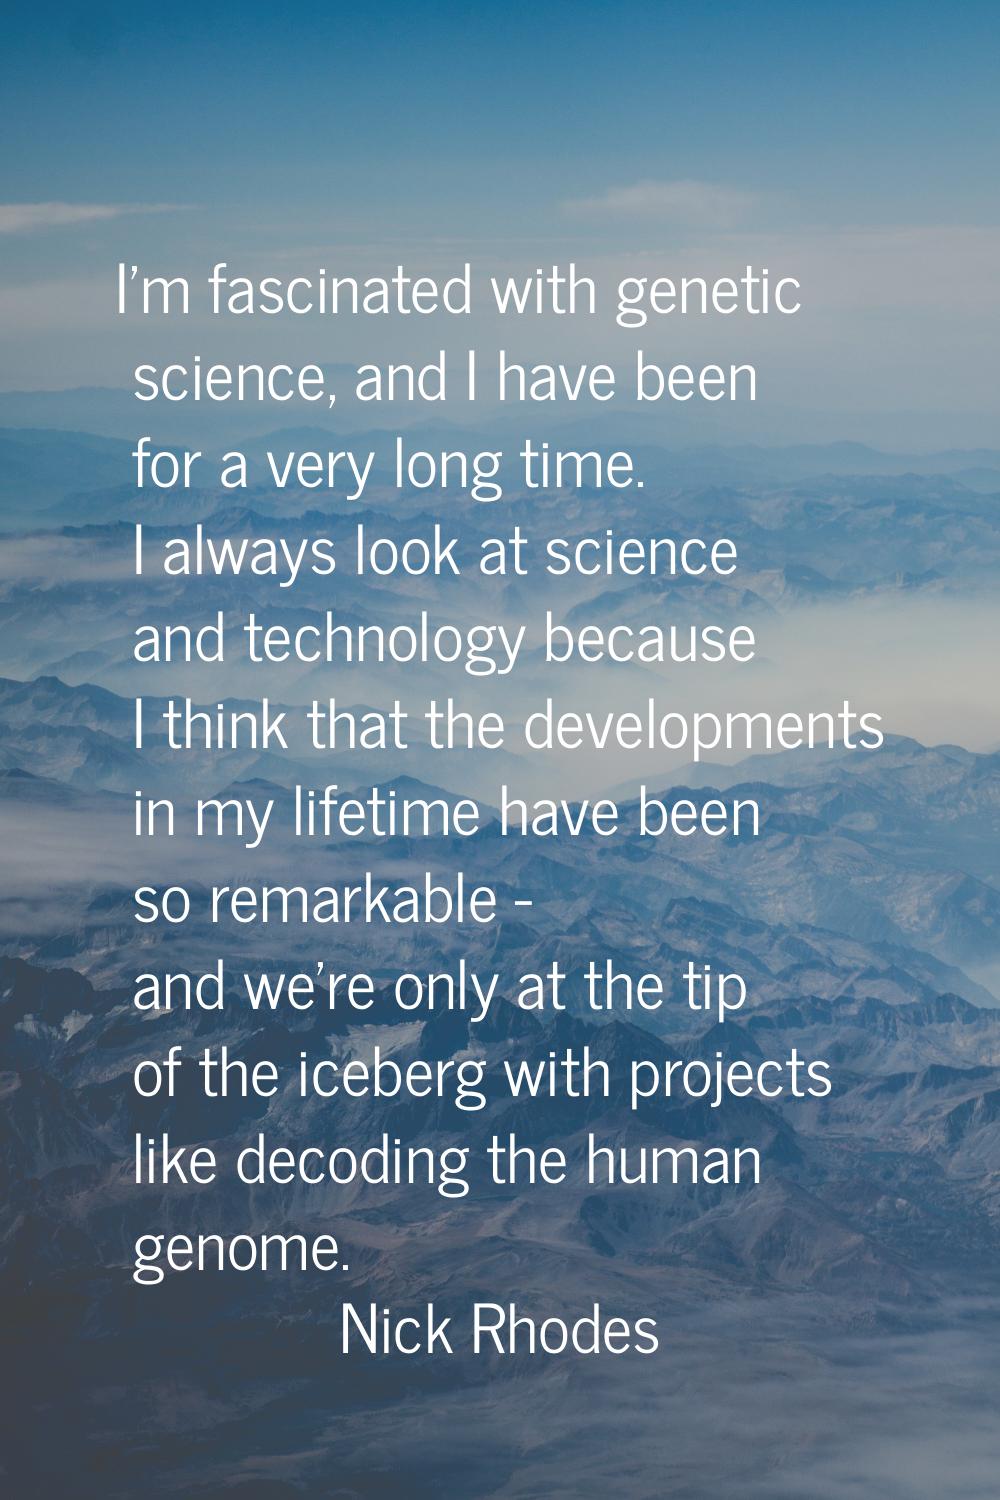 I'm fascinated with genetic science, and I have been for a very long time. I always look at science